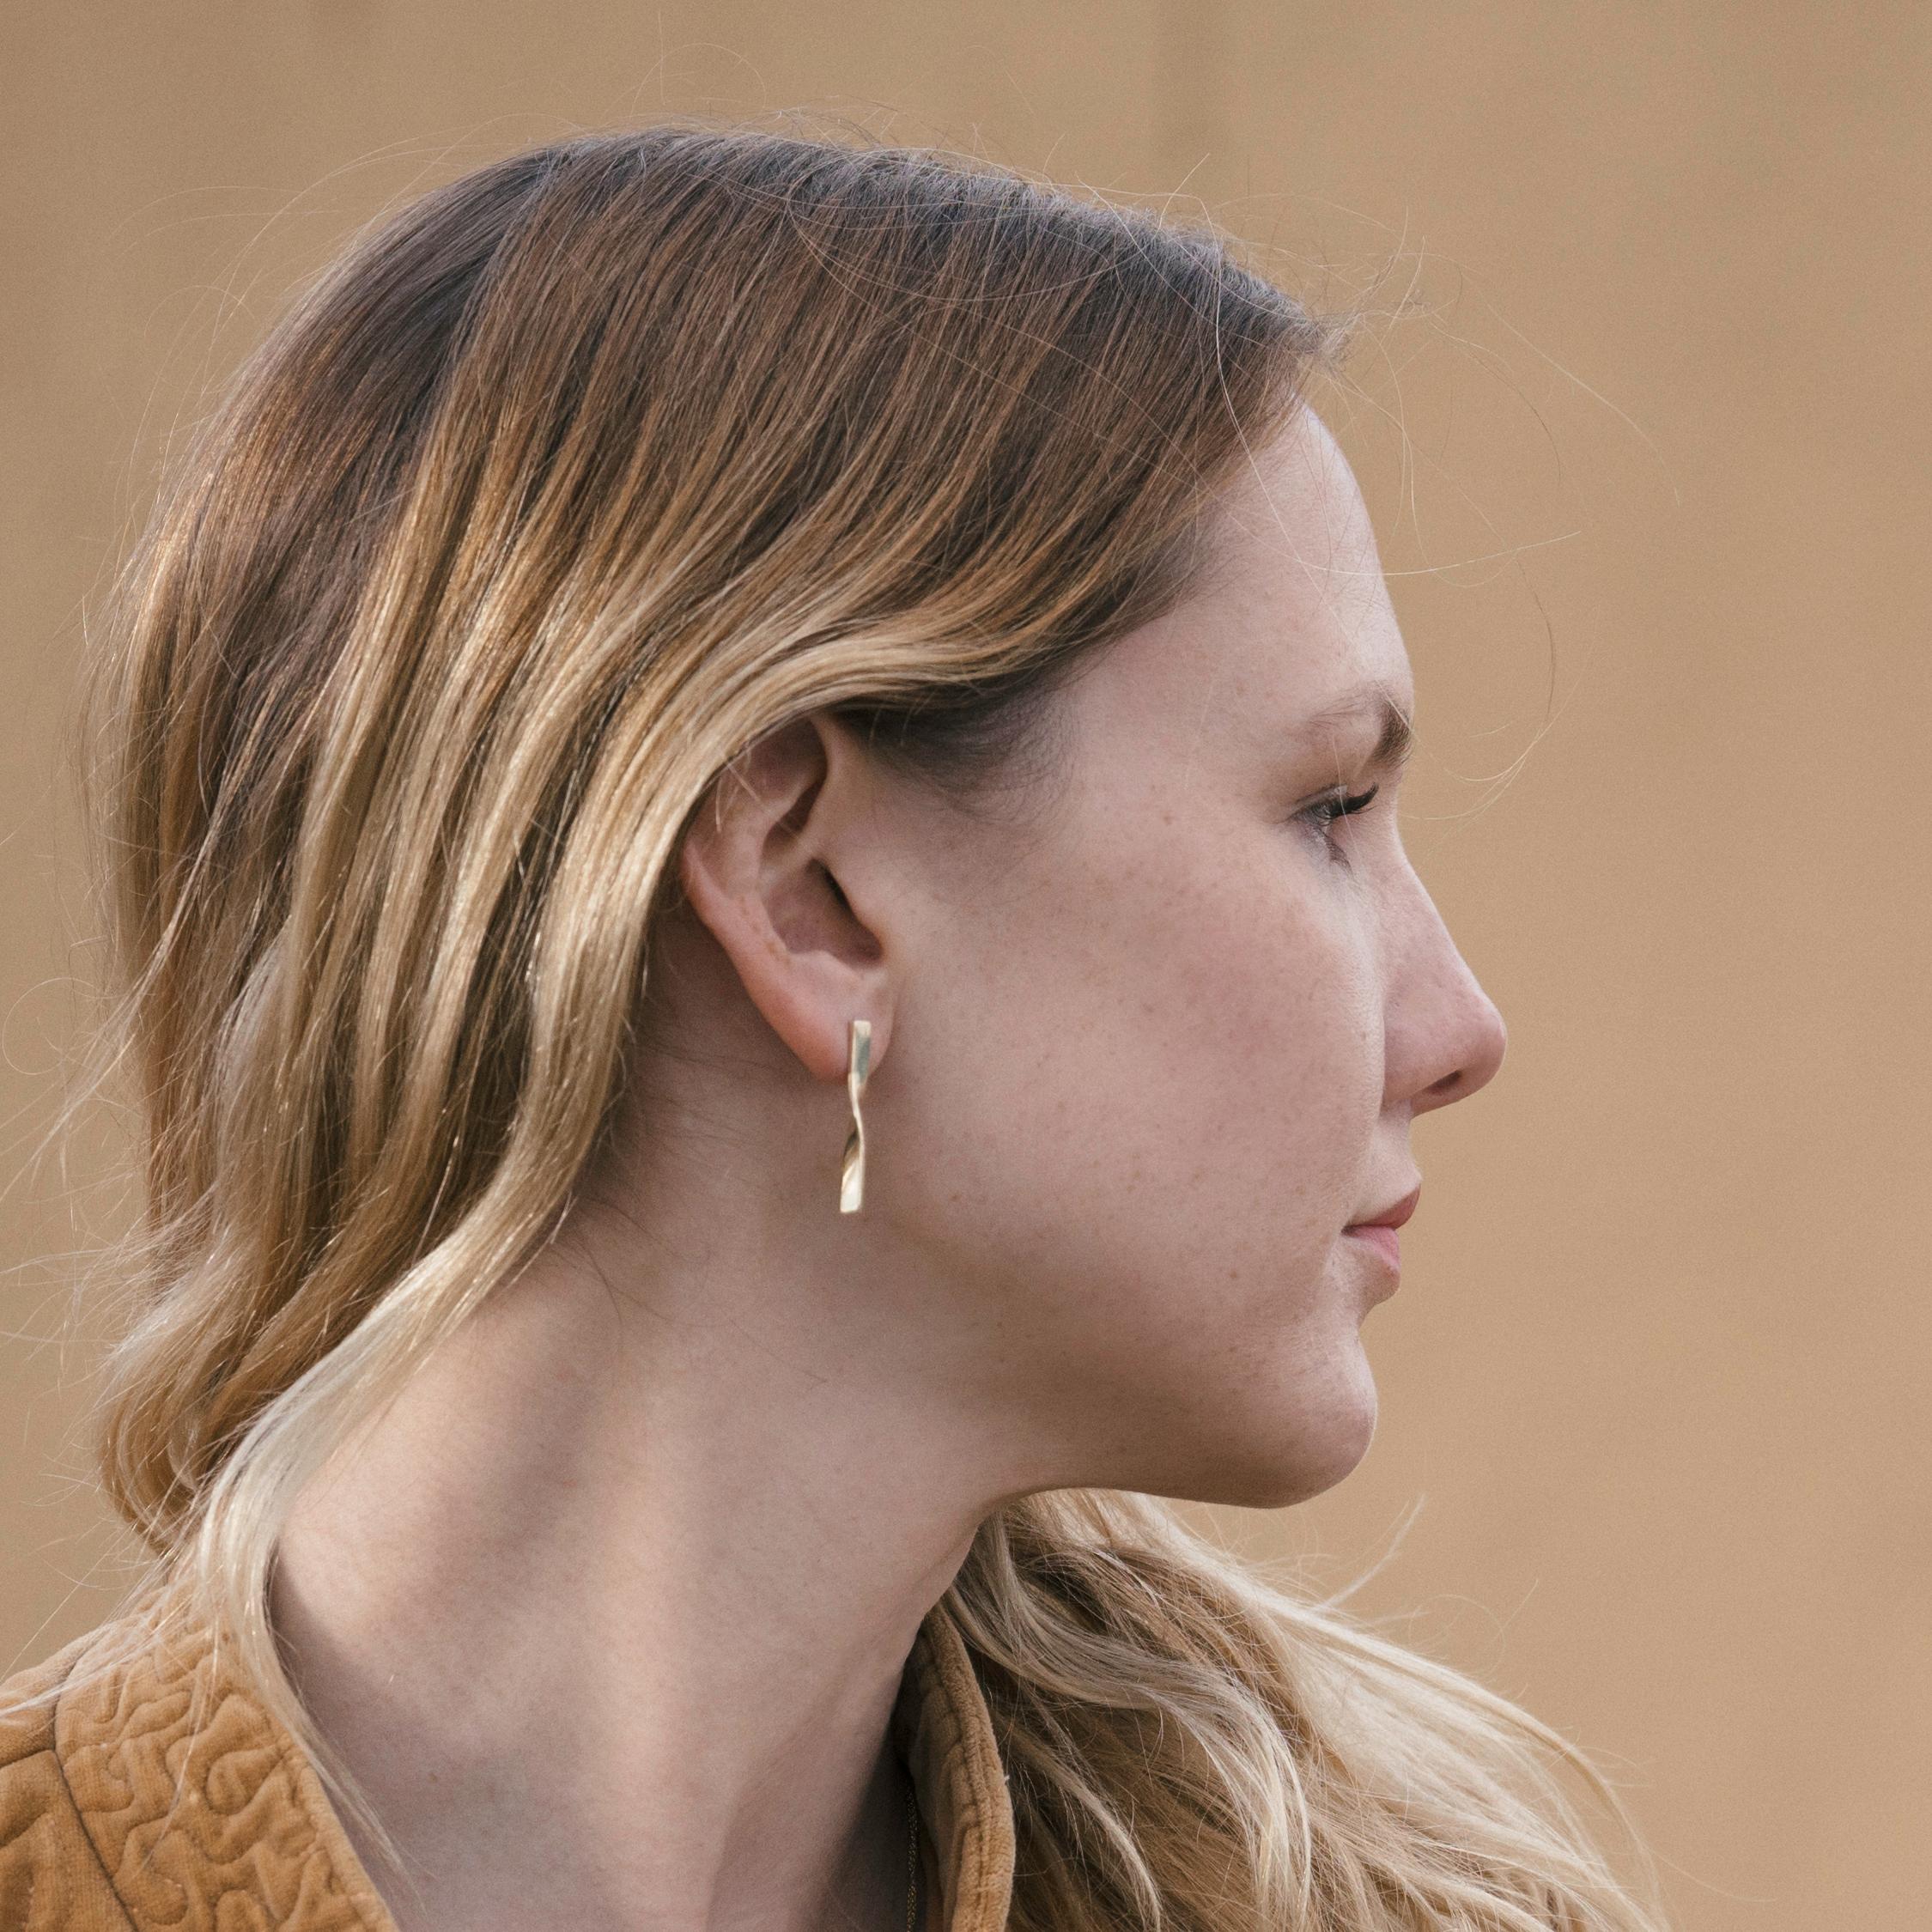 The Shift Earrings taper and twist in unison as they make a graceful quarter turn. The two earrings mirror each other and can be interchanged to reverse their orientation to the face. Their subtle transformation is an ode to shifting perspectives.